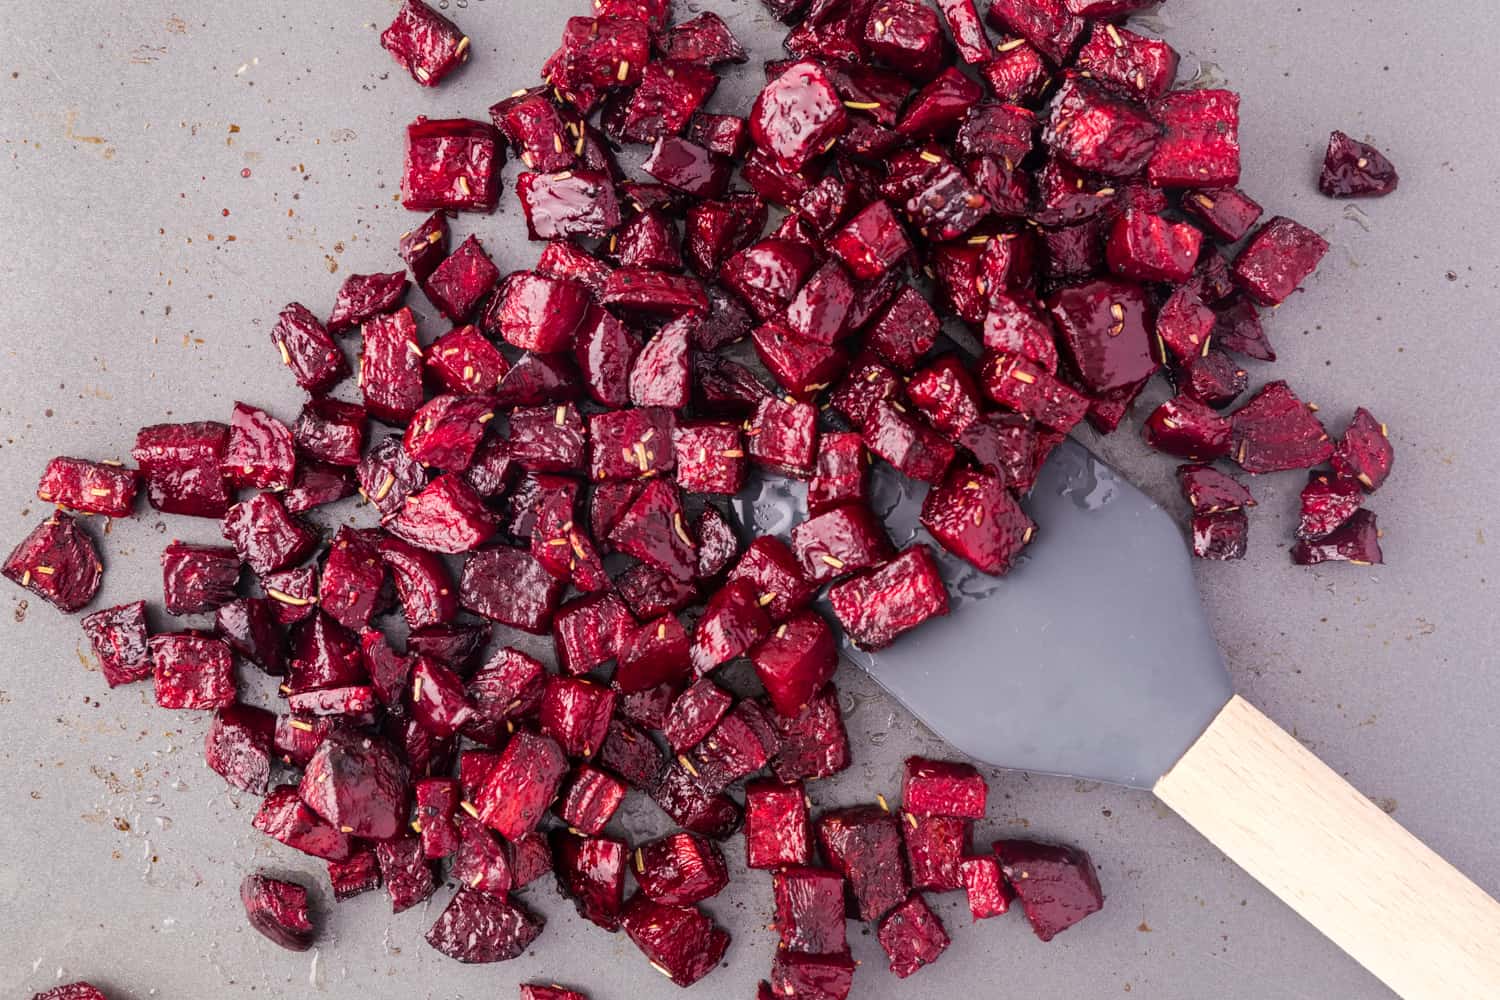 Roasted beets on a sheet pan.